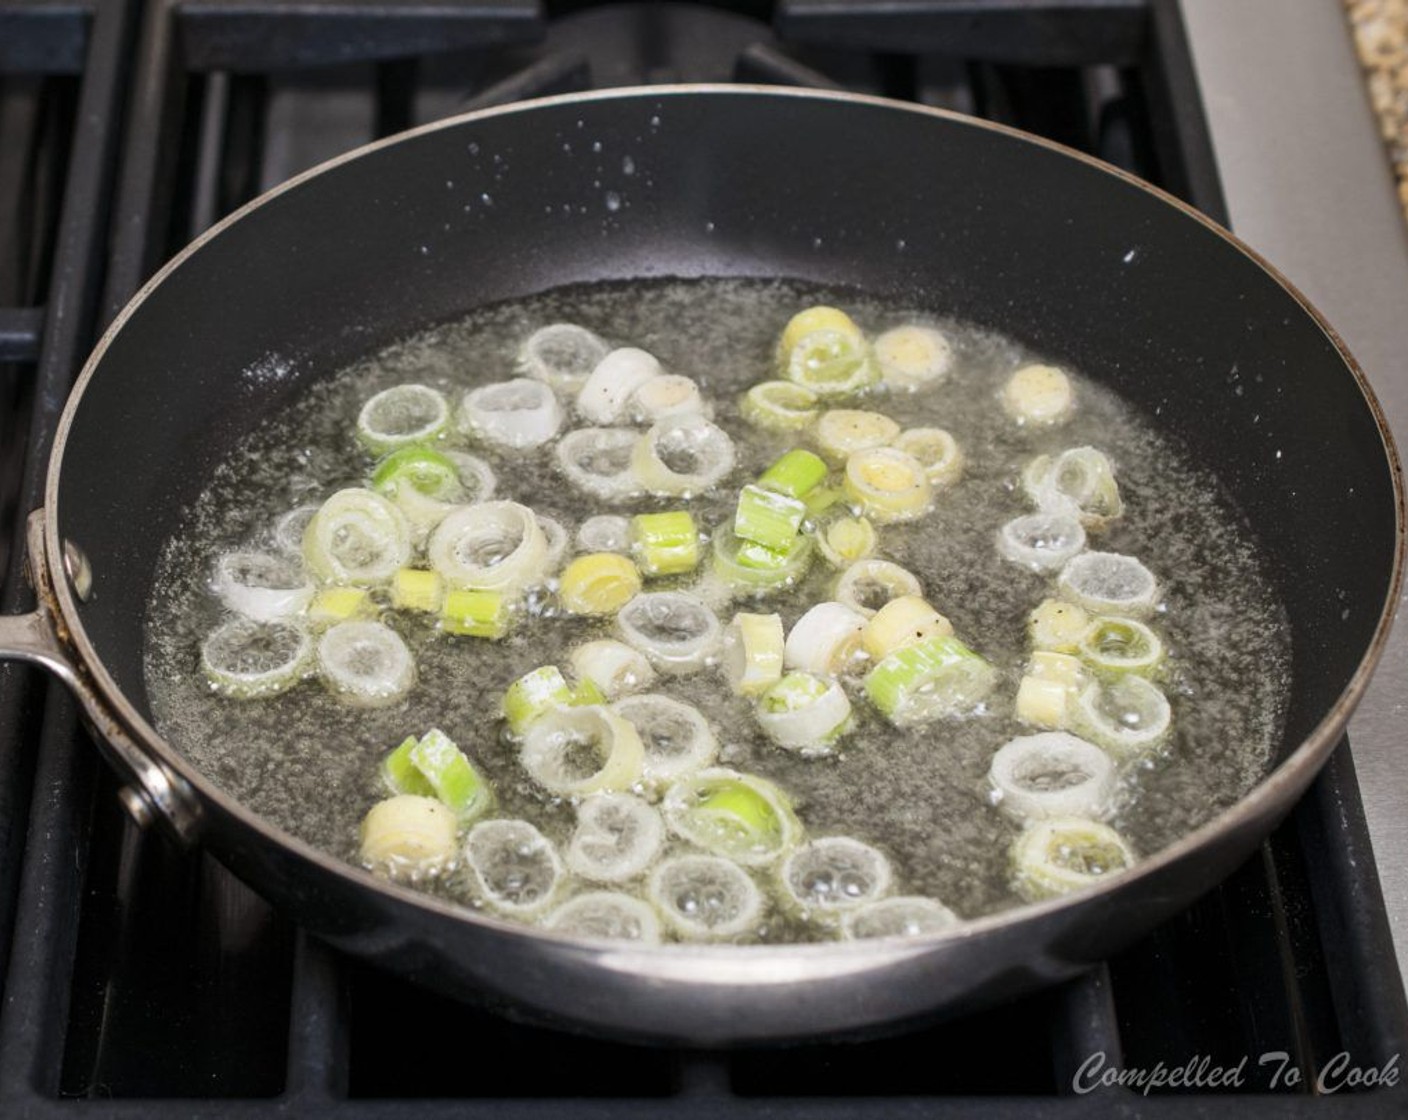 step 14 Fry for 4-5 minutes until golden, turning once. Using a slotted scoop remove leeks from oil and allow to drain on a paper towel lined plate. Repeat the frying process with remaining leeks. Keep uncovered at room temperature until ready to use.